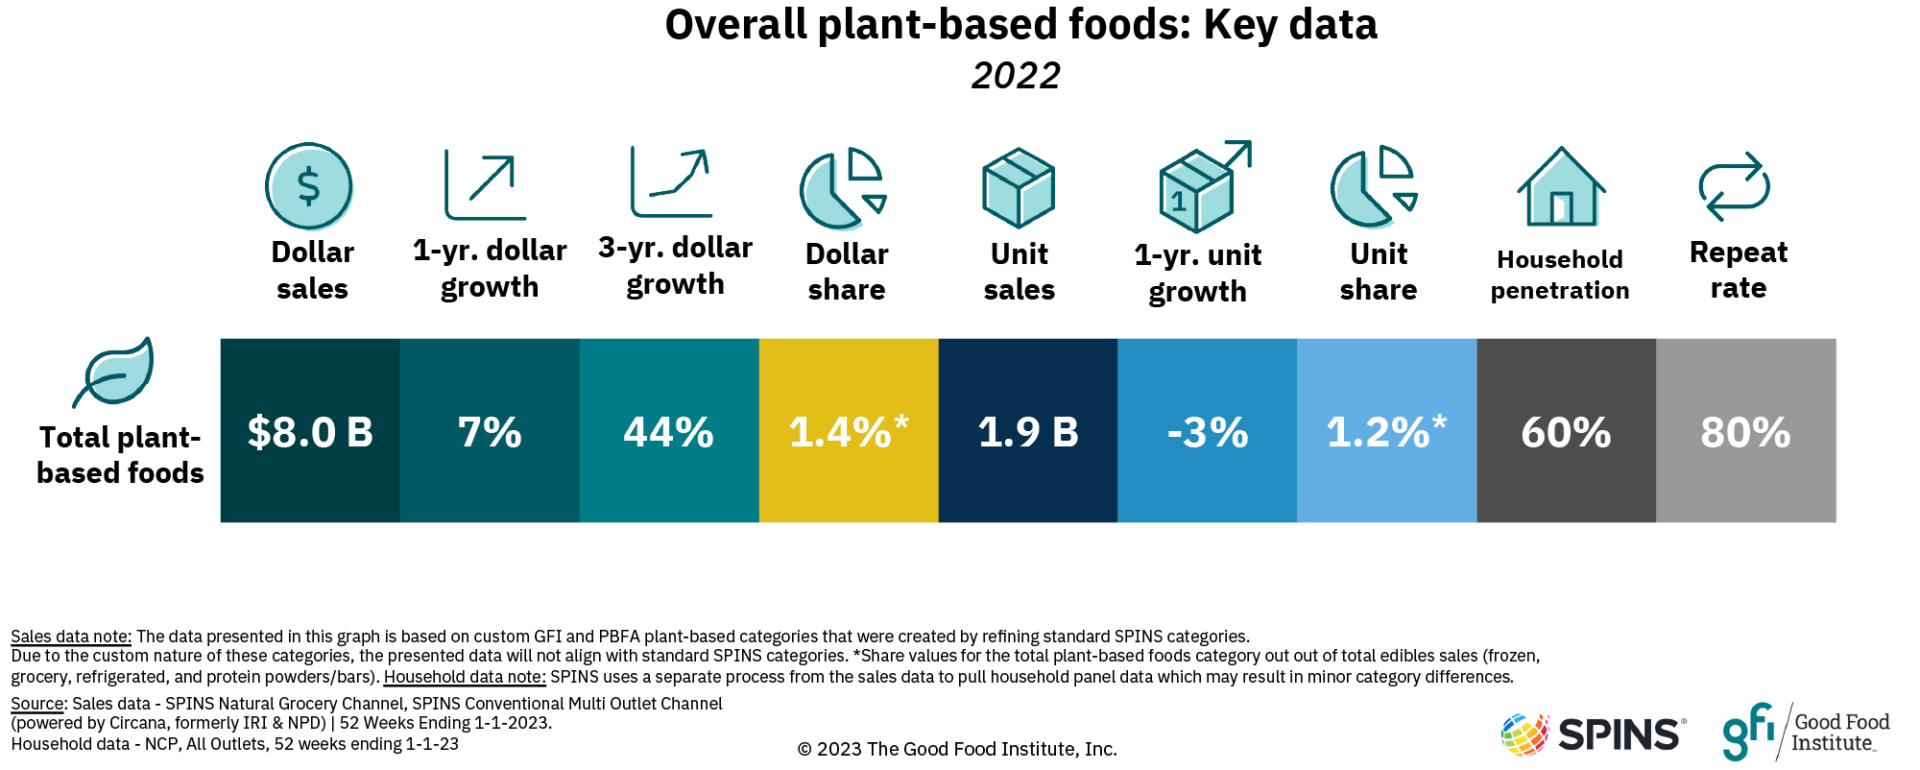 Overall plant-based foods: key data